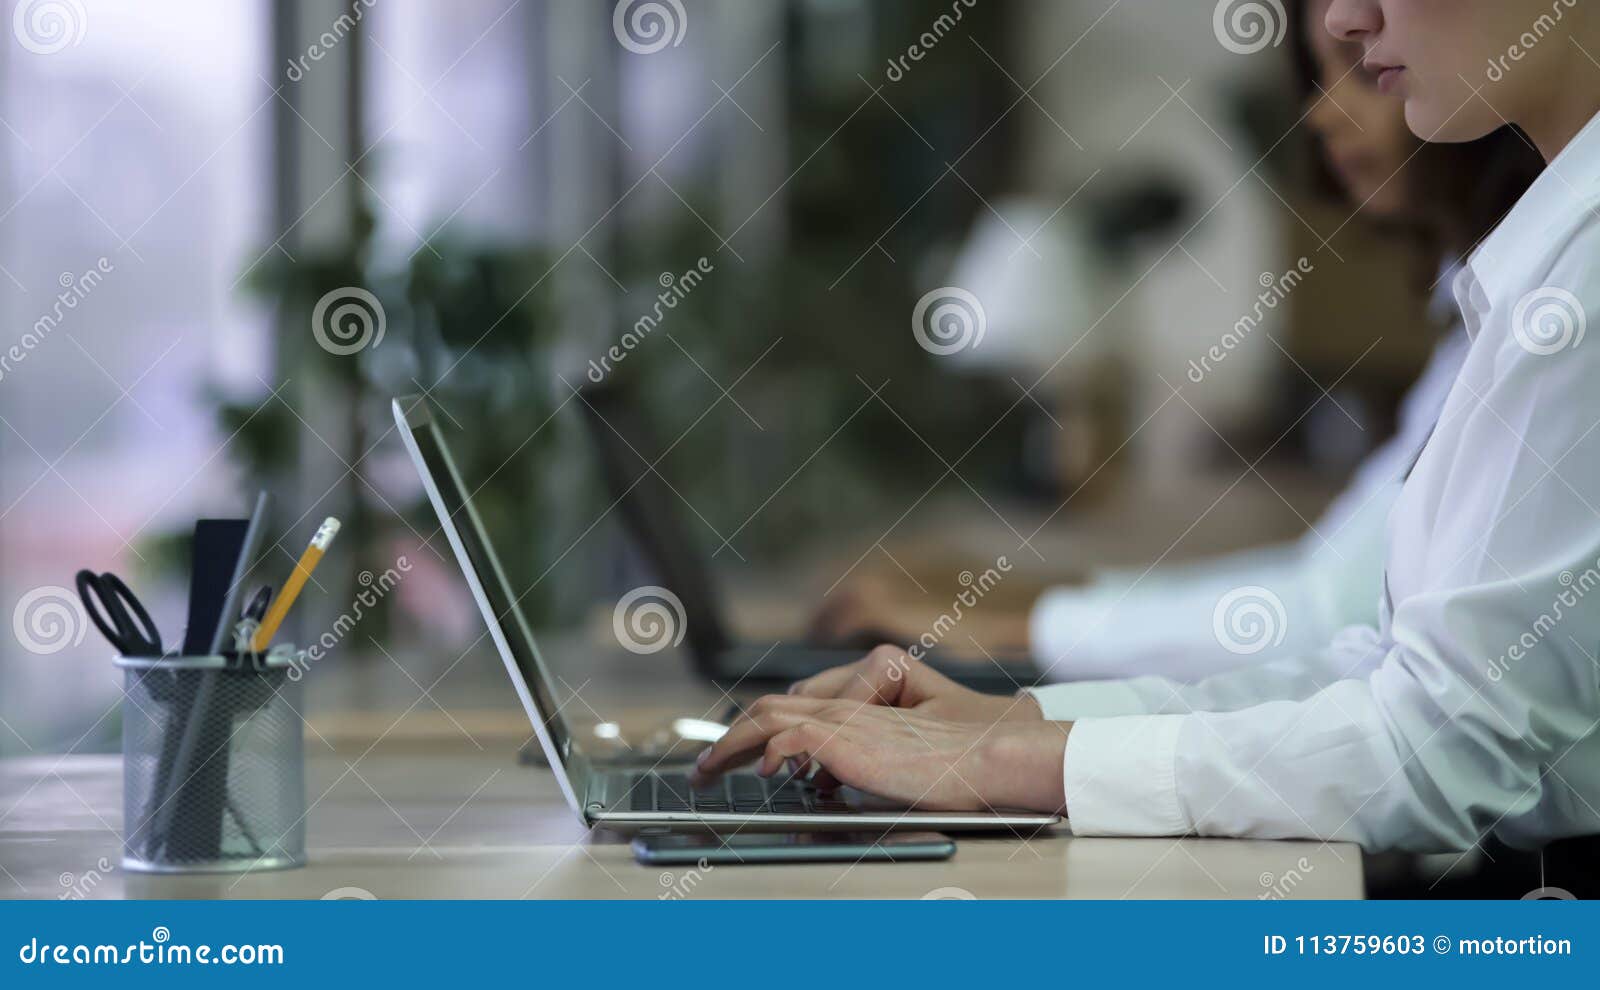 female manager working on laptop at company support center, contacting clients